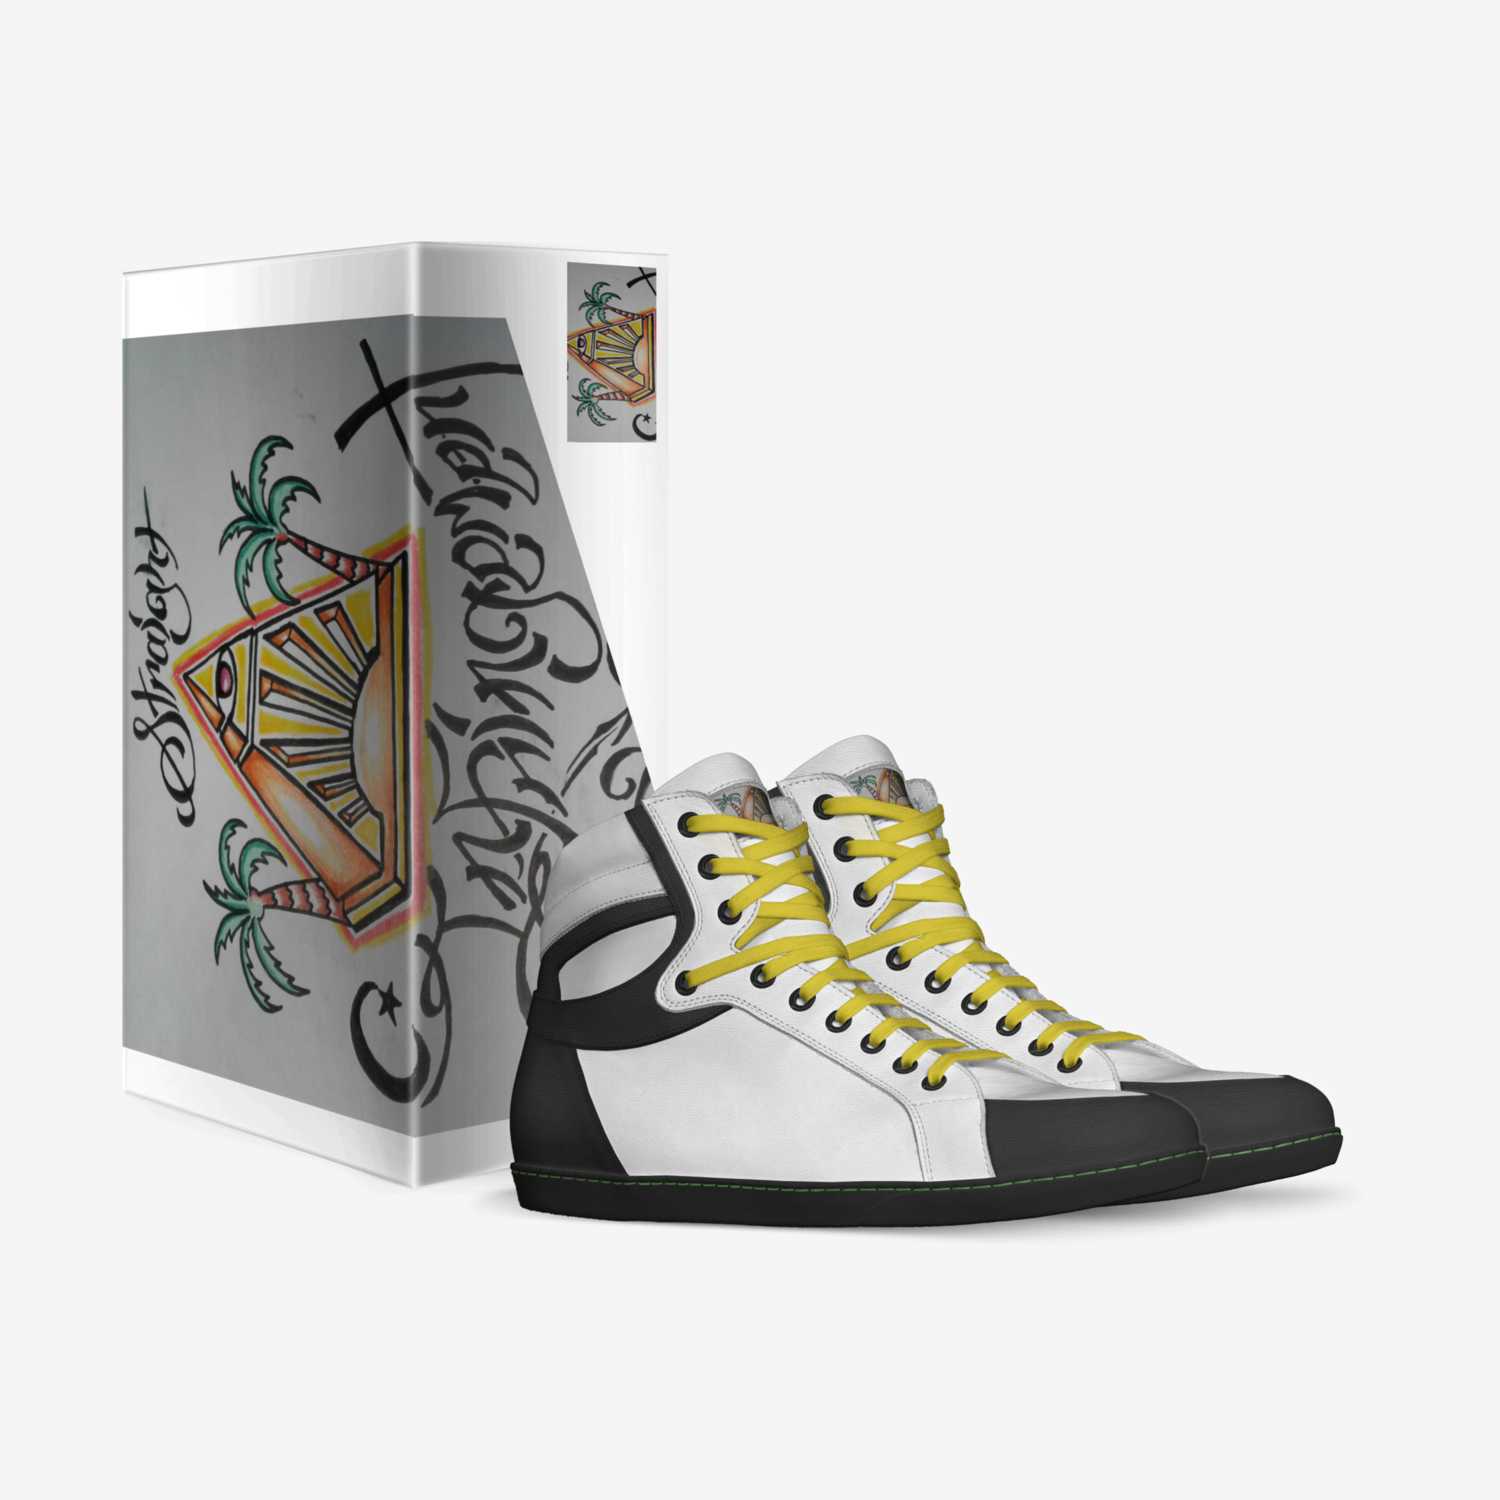 Infringement 5th custom made in Italy shoes by Akbar Muhammad | Box view